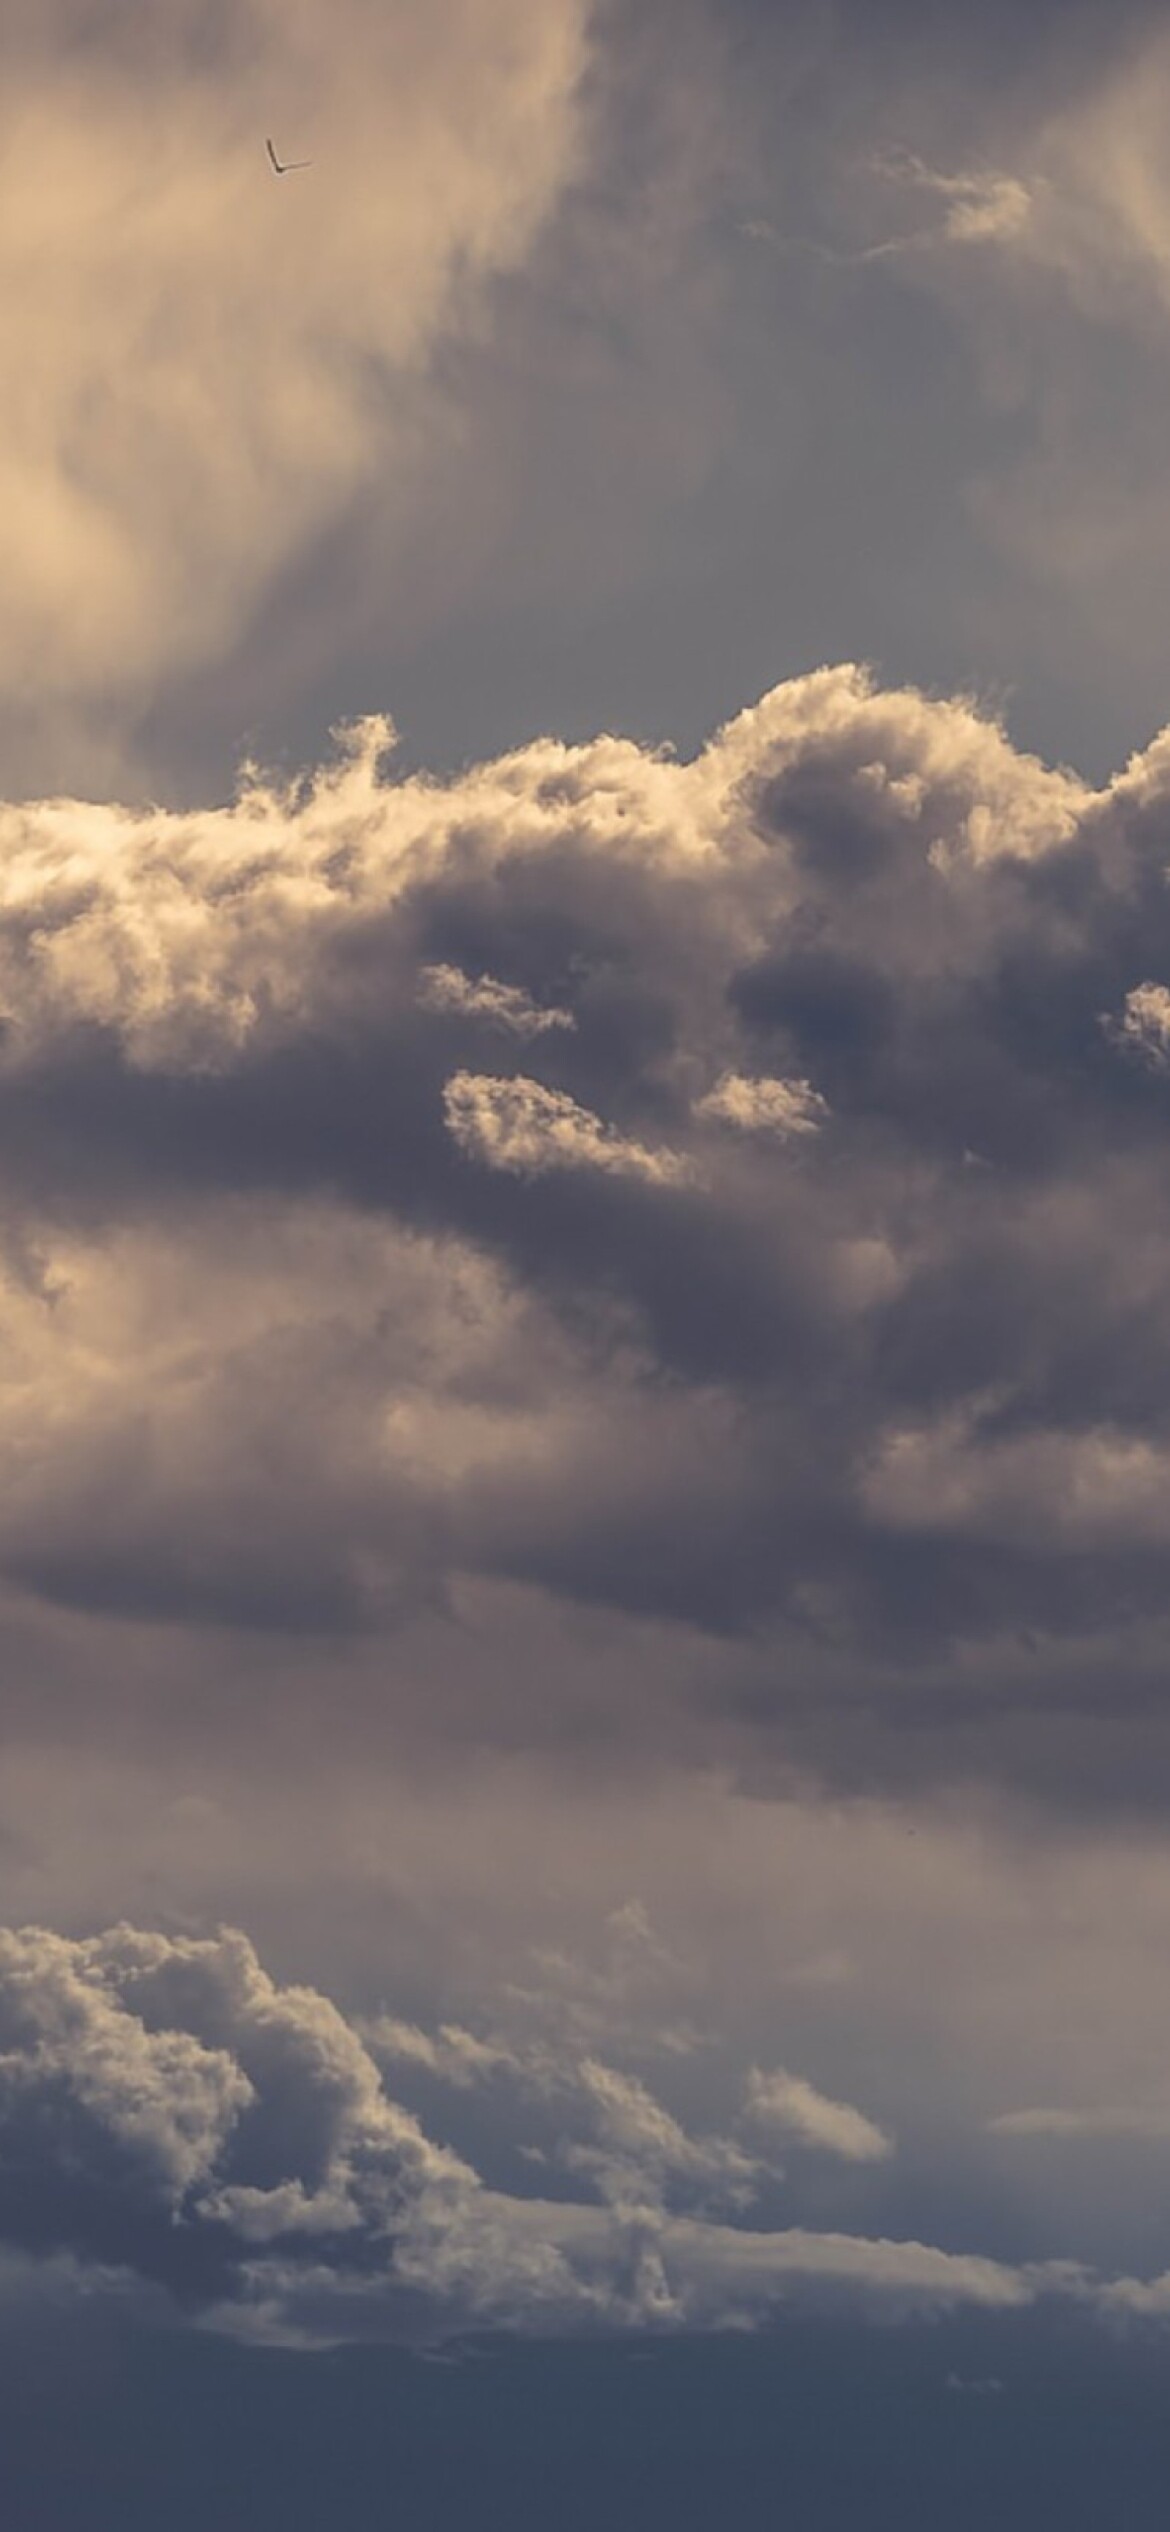 Clouds: Storm, Altocumulus bases show some light-grey shading. 1170x2540 HD Wallpaper.